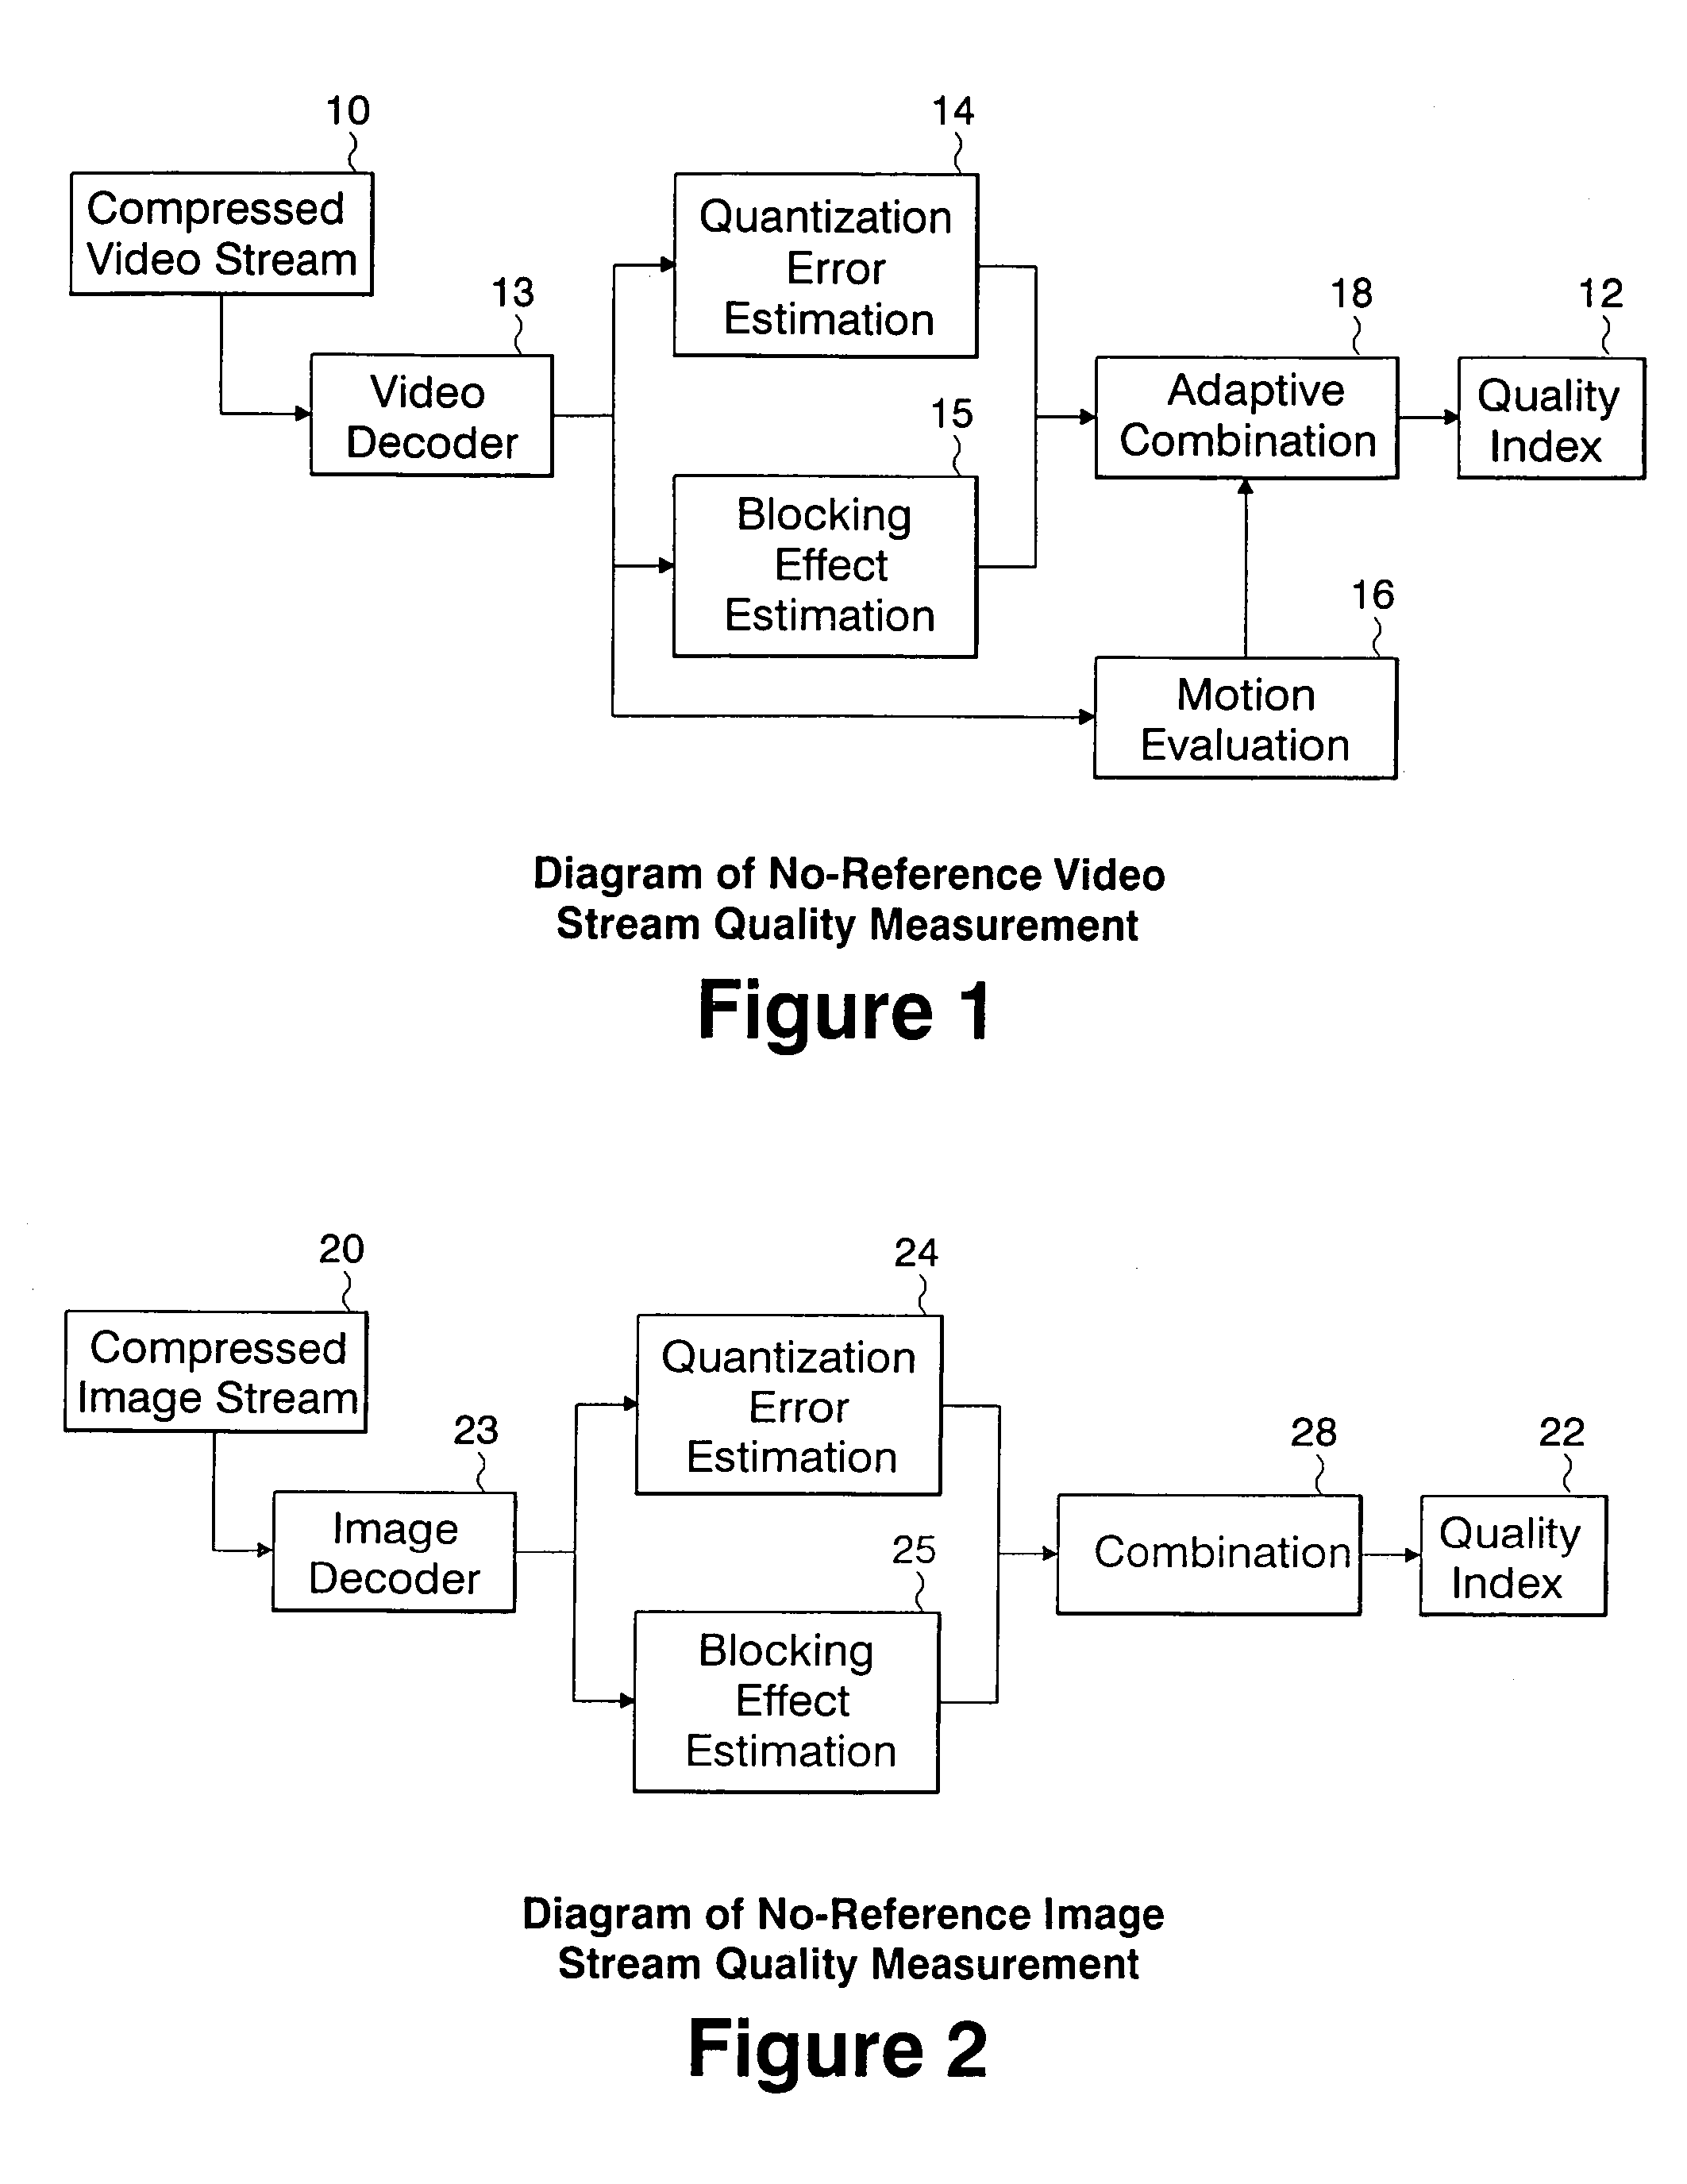 Method and system for objective quality assessment of image and video streams